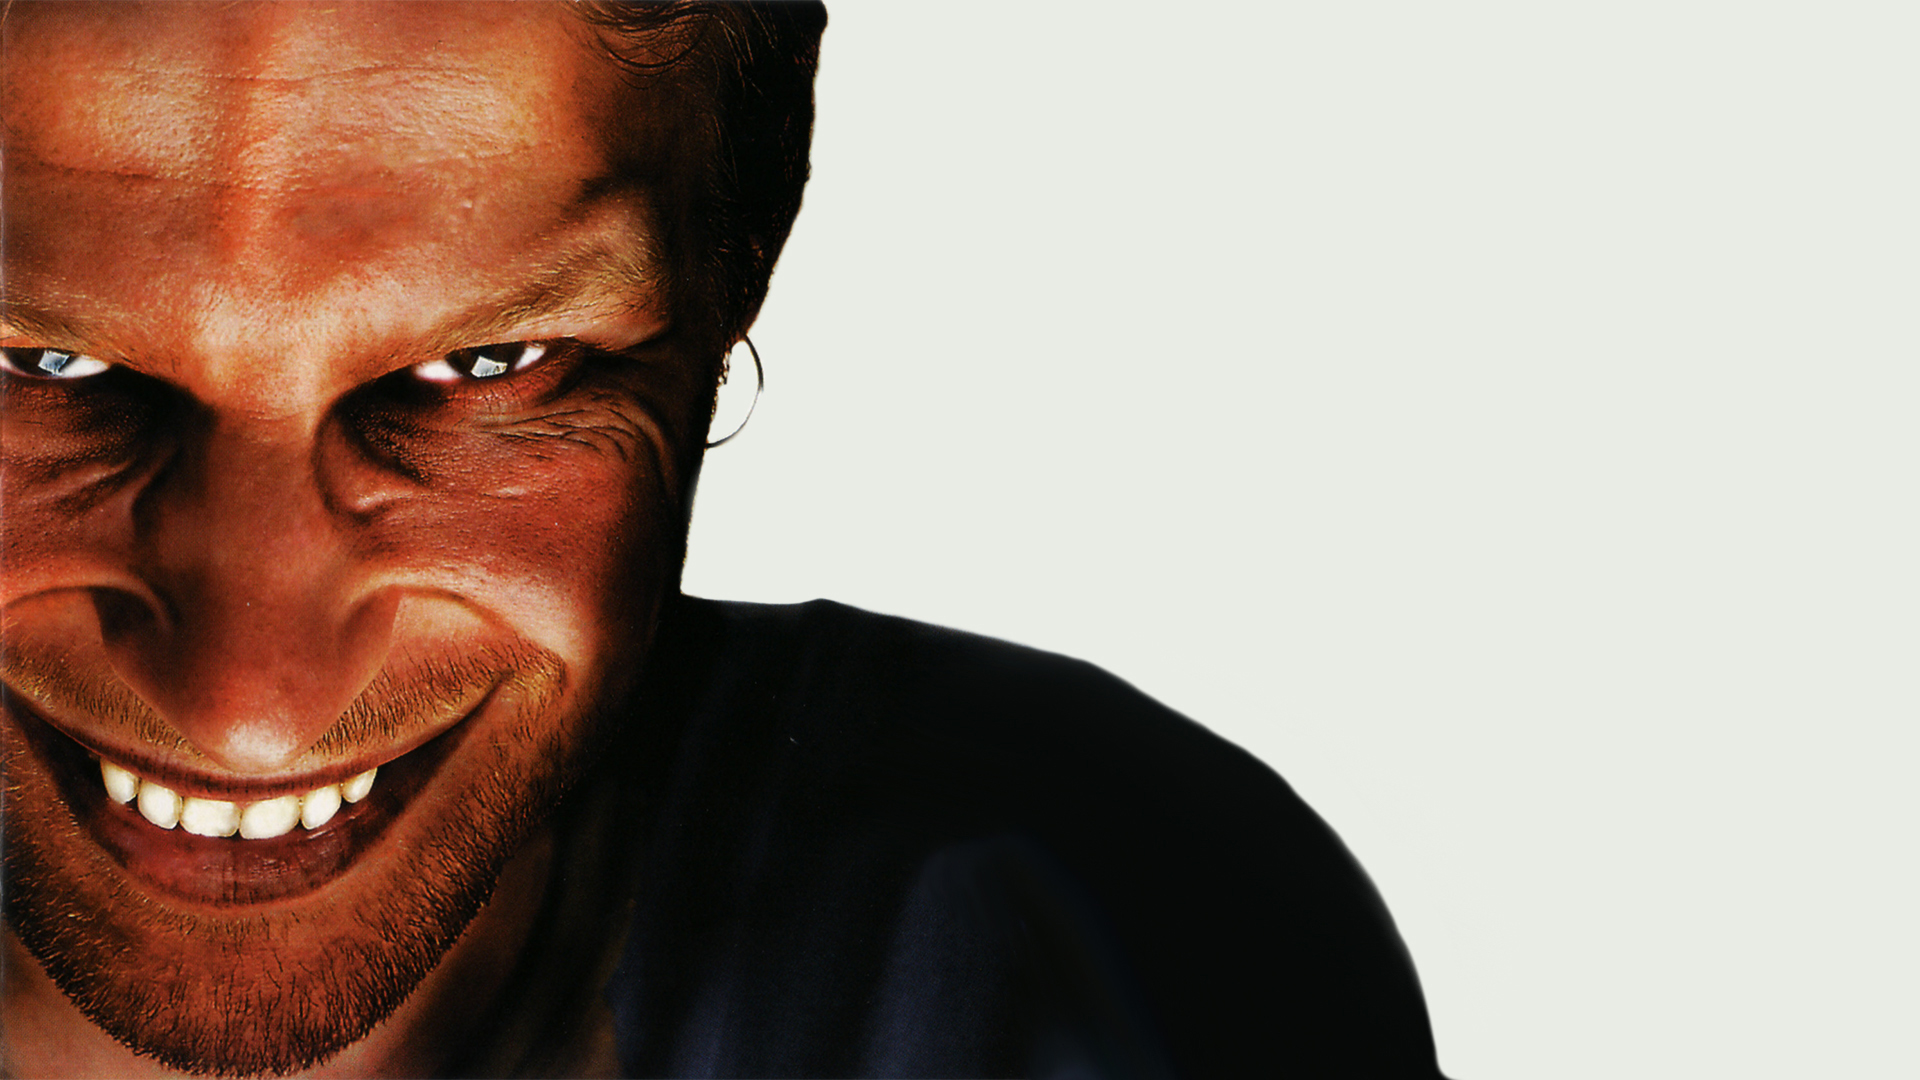 People 1920x1080 Aphex Twin music idm smiling face looking at viewer teeth white background men brown eyes closeup album covers cover art wrinkles musician